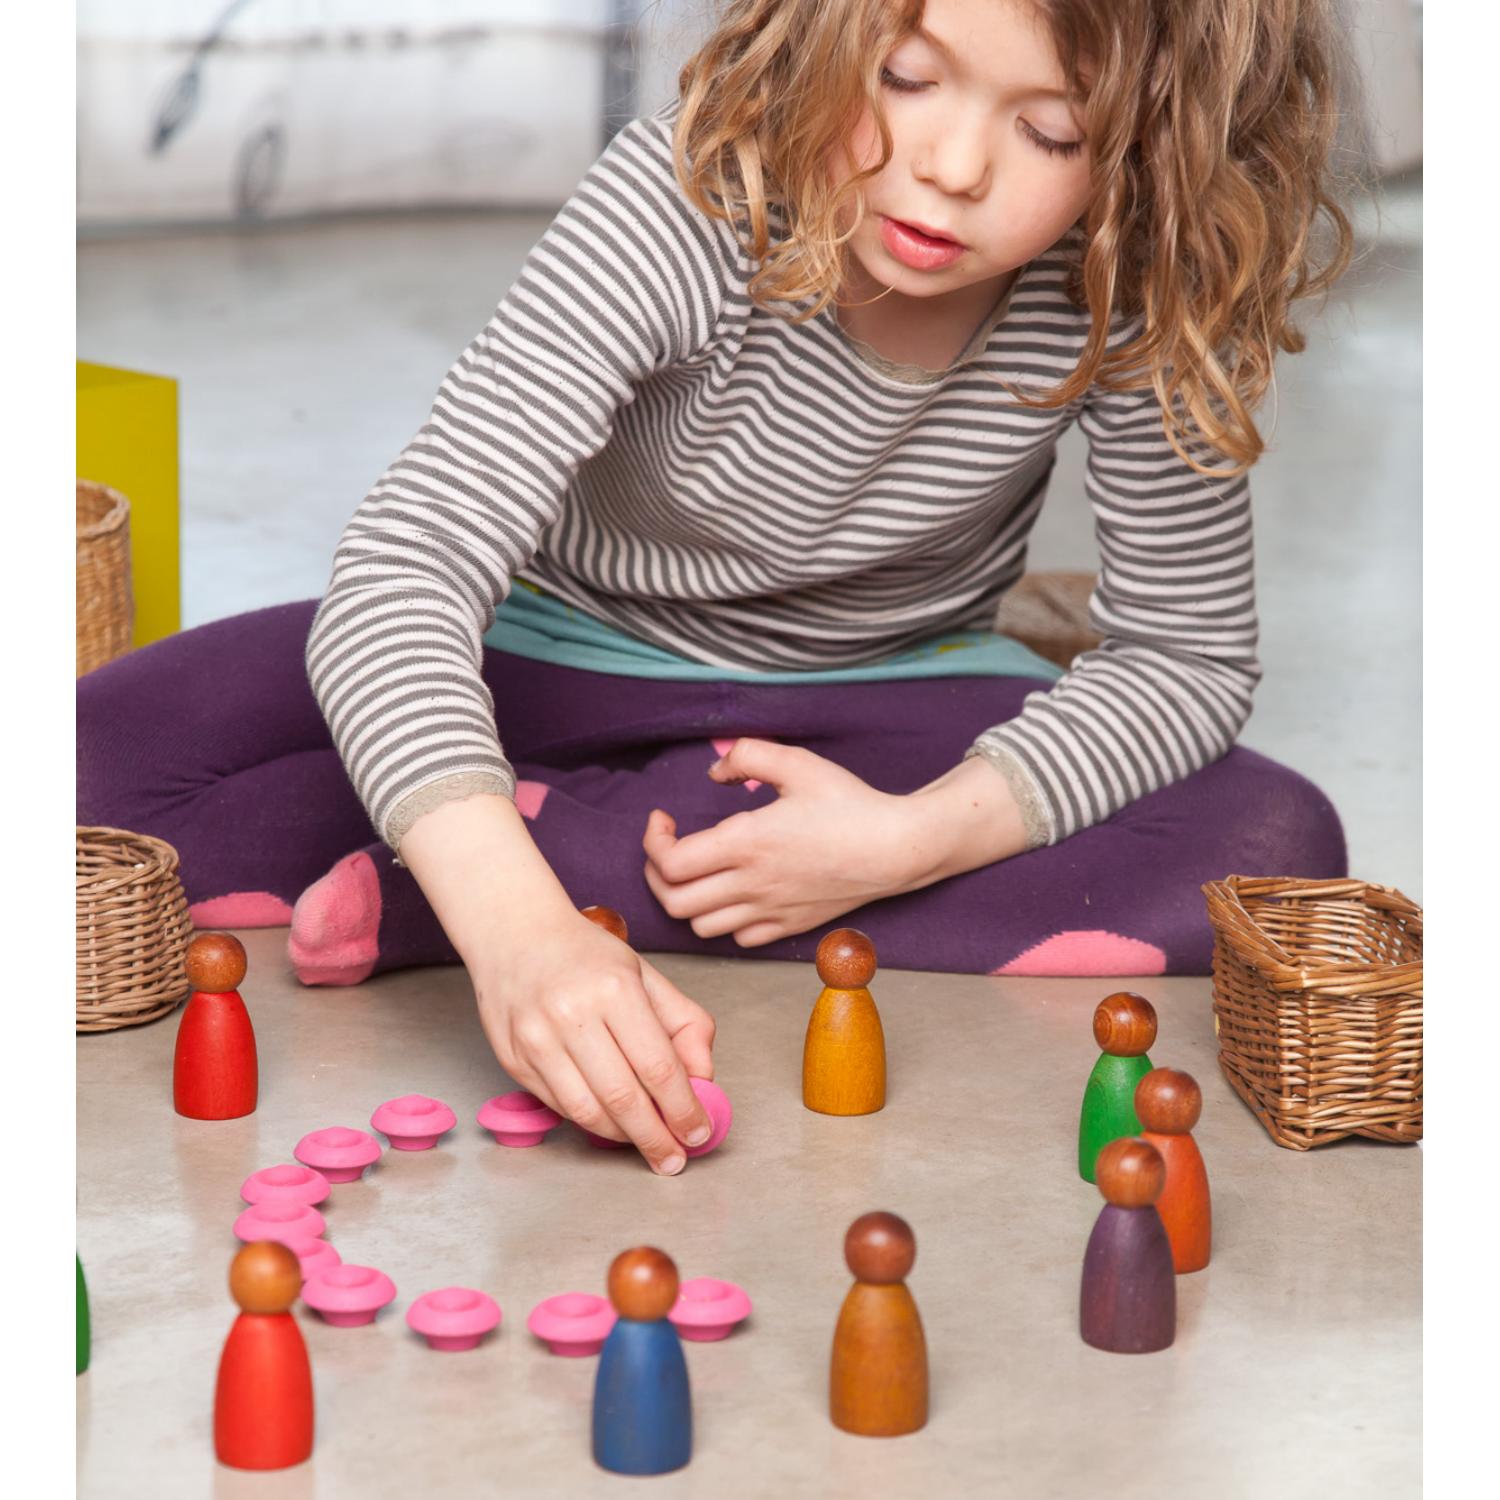 Grapat 3 Dark Wood Nins Stained In Warm Colours | Wooden Toys for Kids | Open-Ended Play Set | Lifestyle: Girl Playing with Dark Wood Nins | BeoVERDE.ie